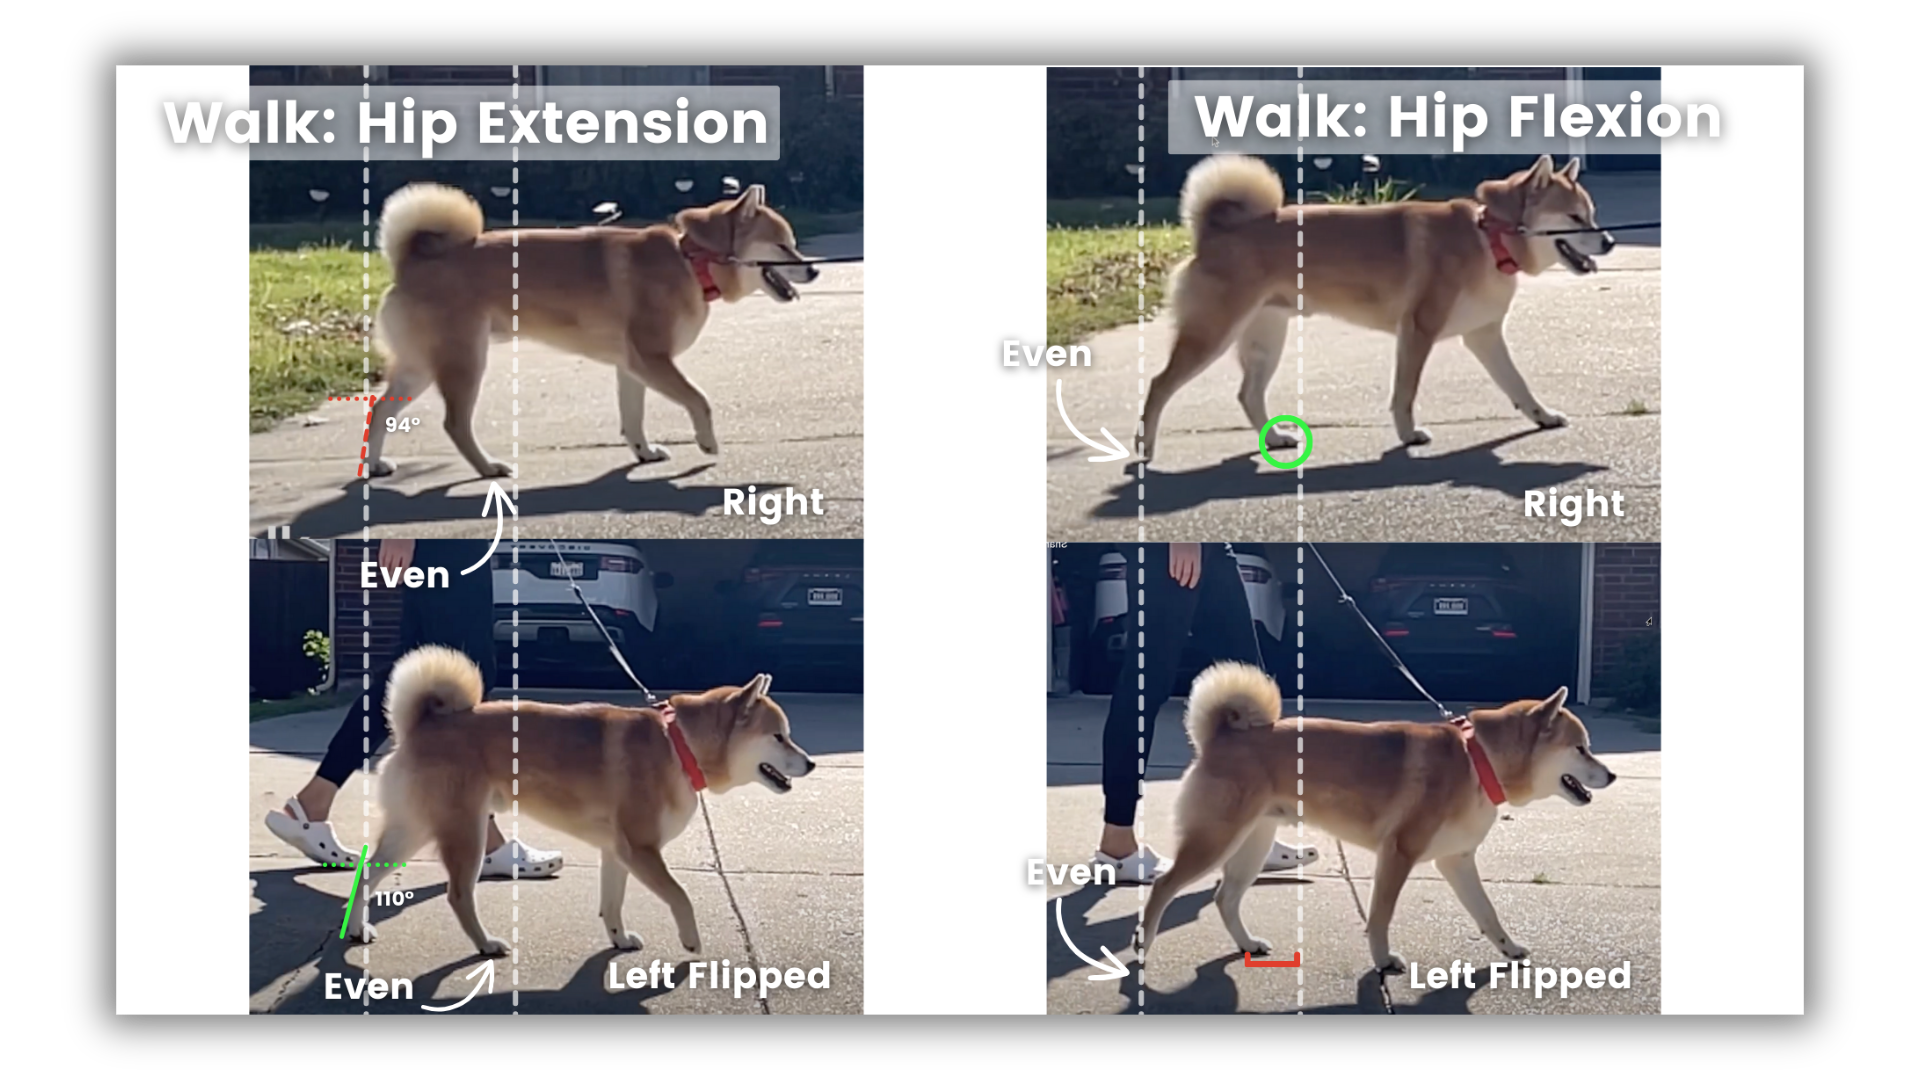 Gait analysis images showing the walk shot form the side.